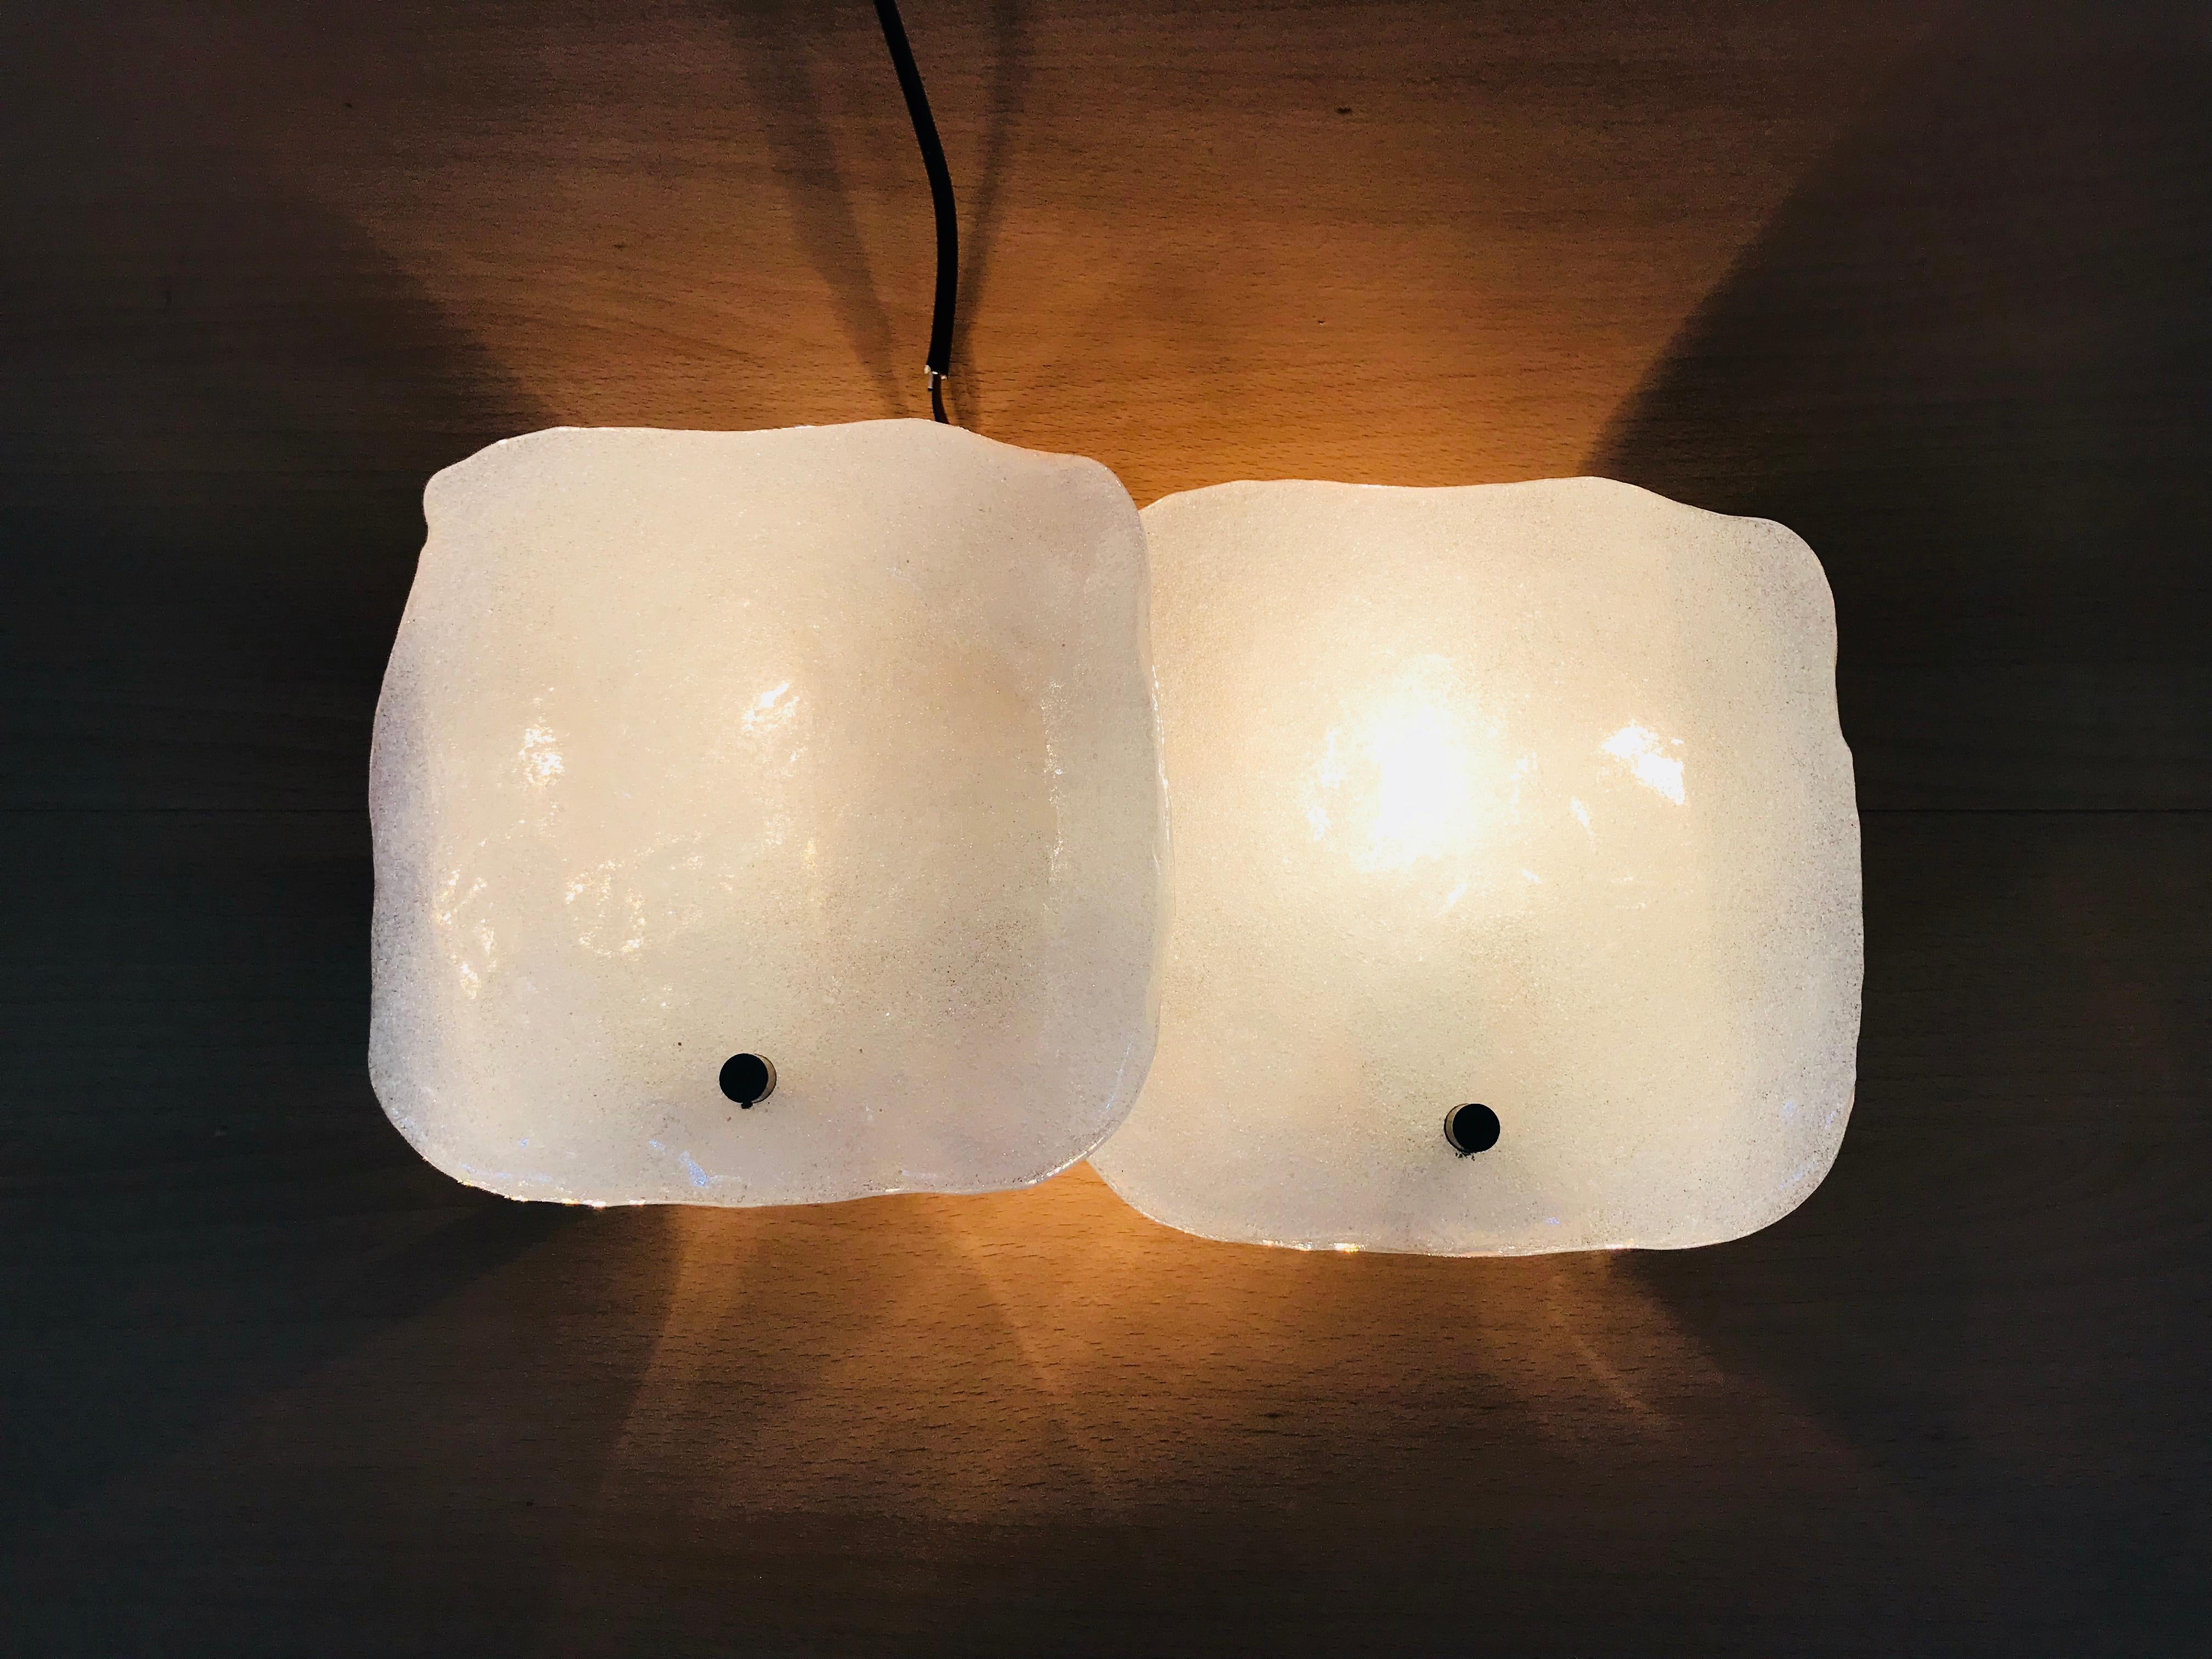 Amazing wall lamp by the Austrian brand Kalmar Franken made in the 1960s. Two Square frosted ice glasses secure to the chrome aluminum frame. There are two sockets which require E14 light bulbs.